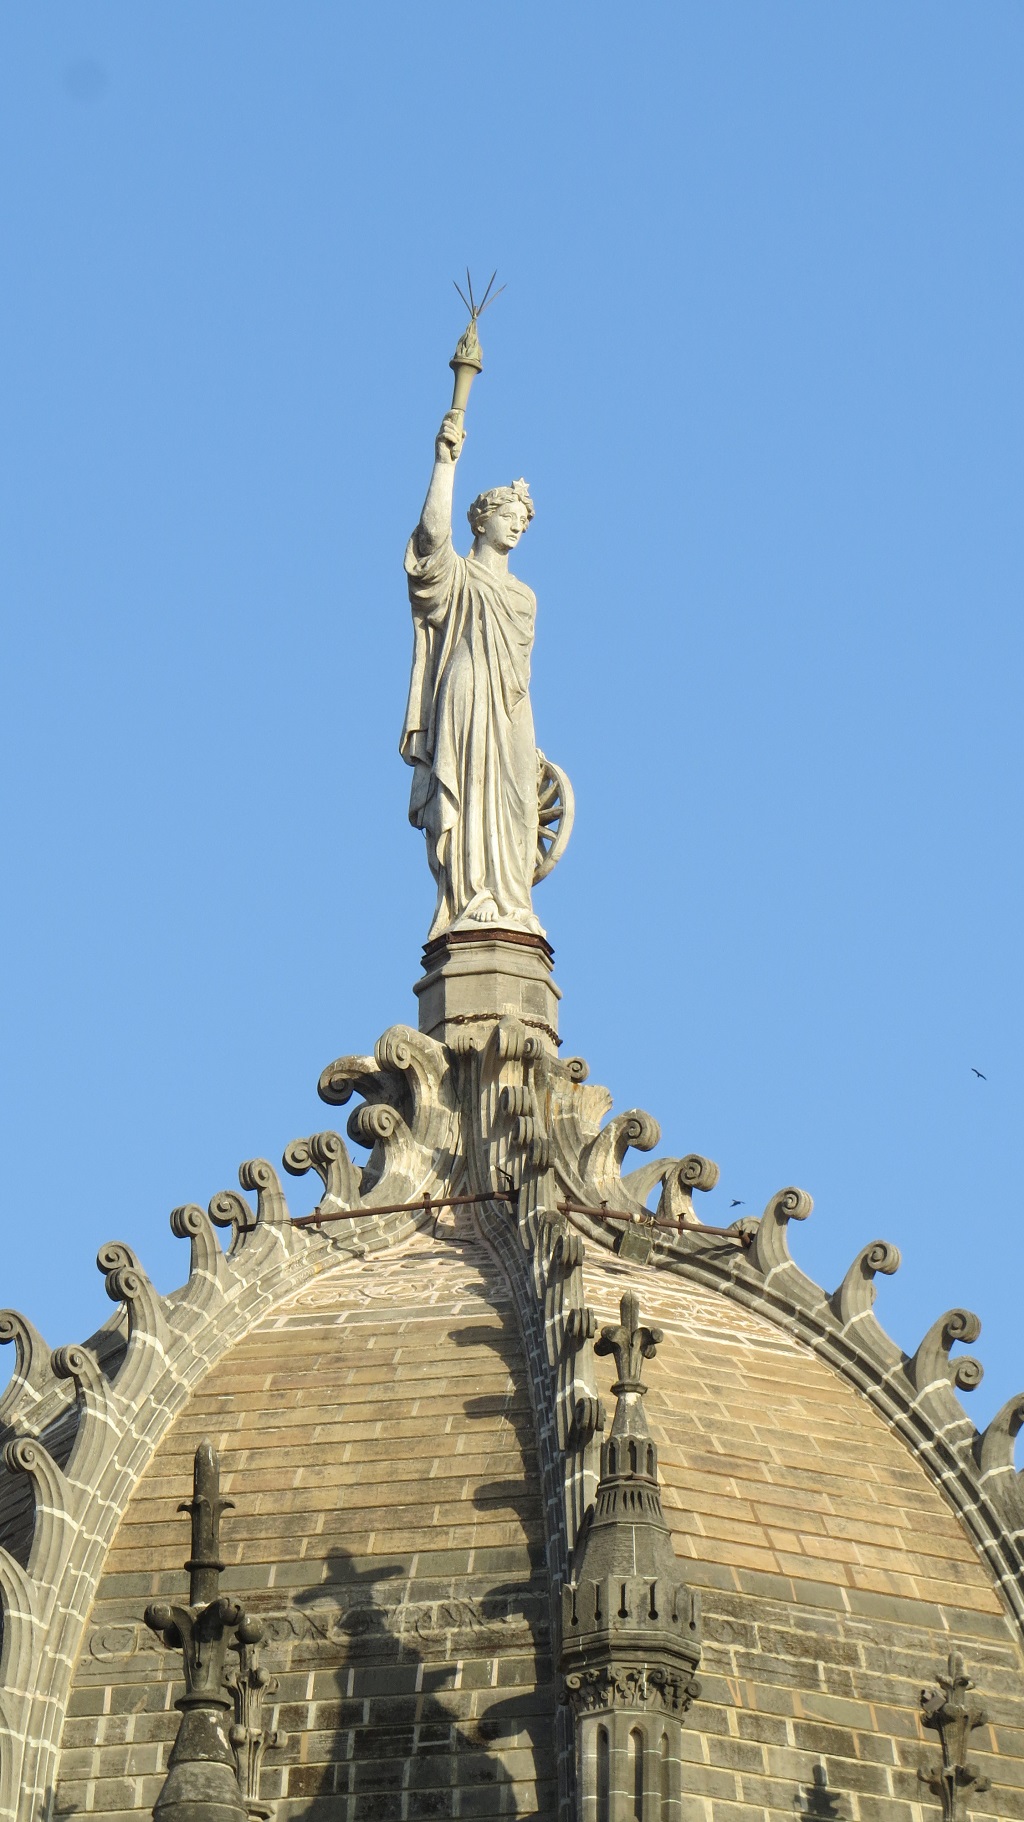 The Lady of Progress – The Statue Atop the CSMT Dome